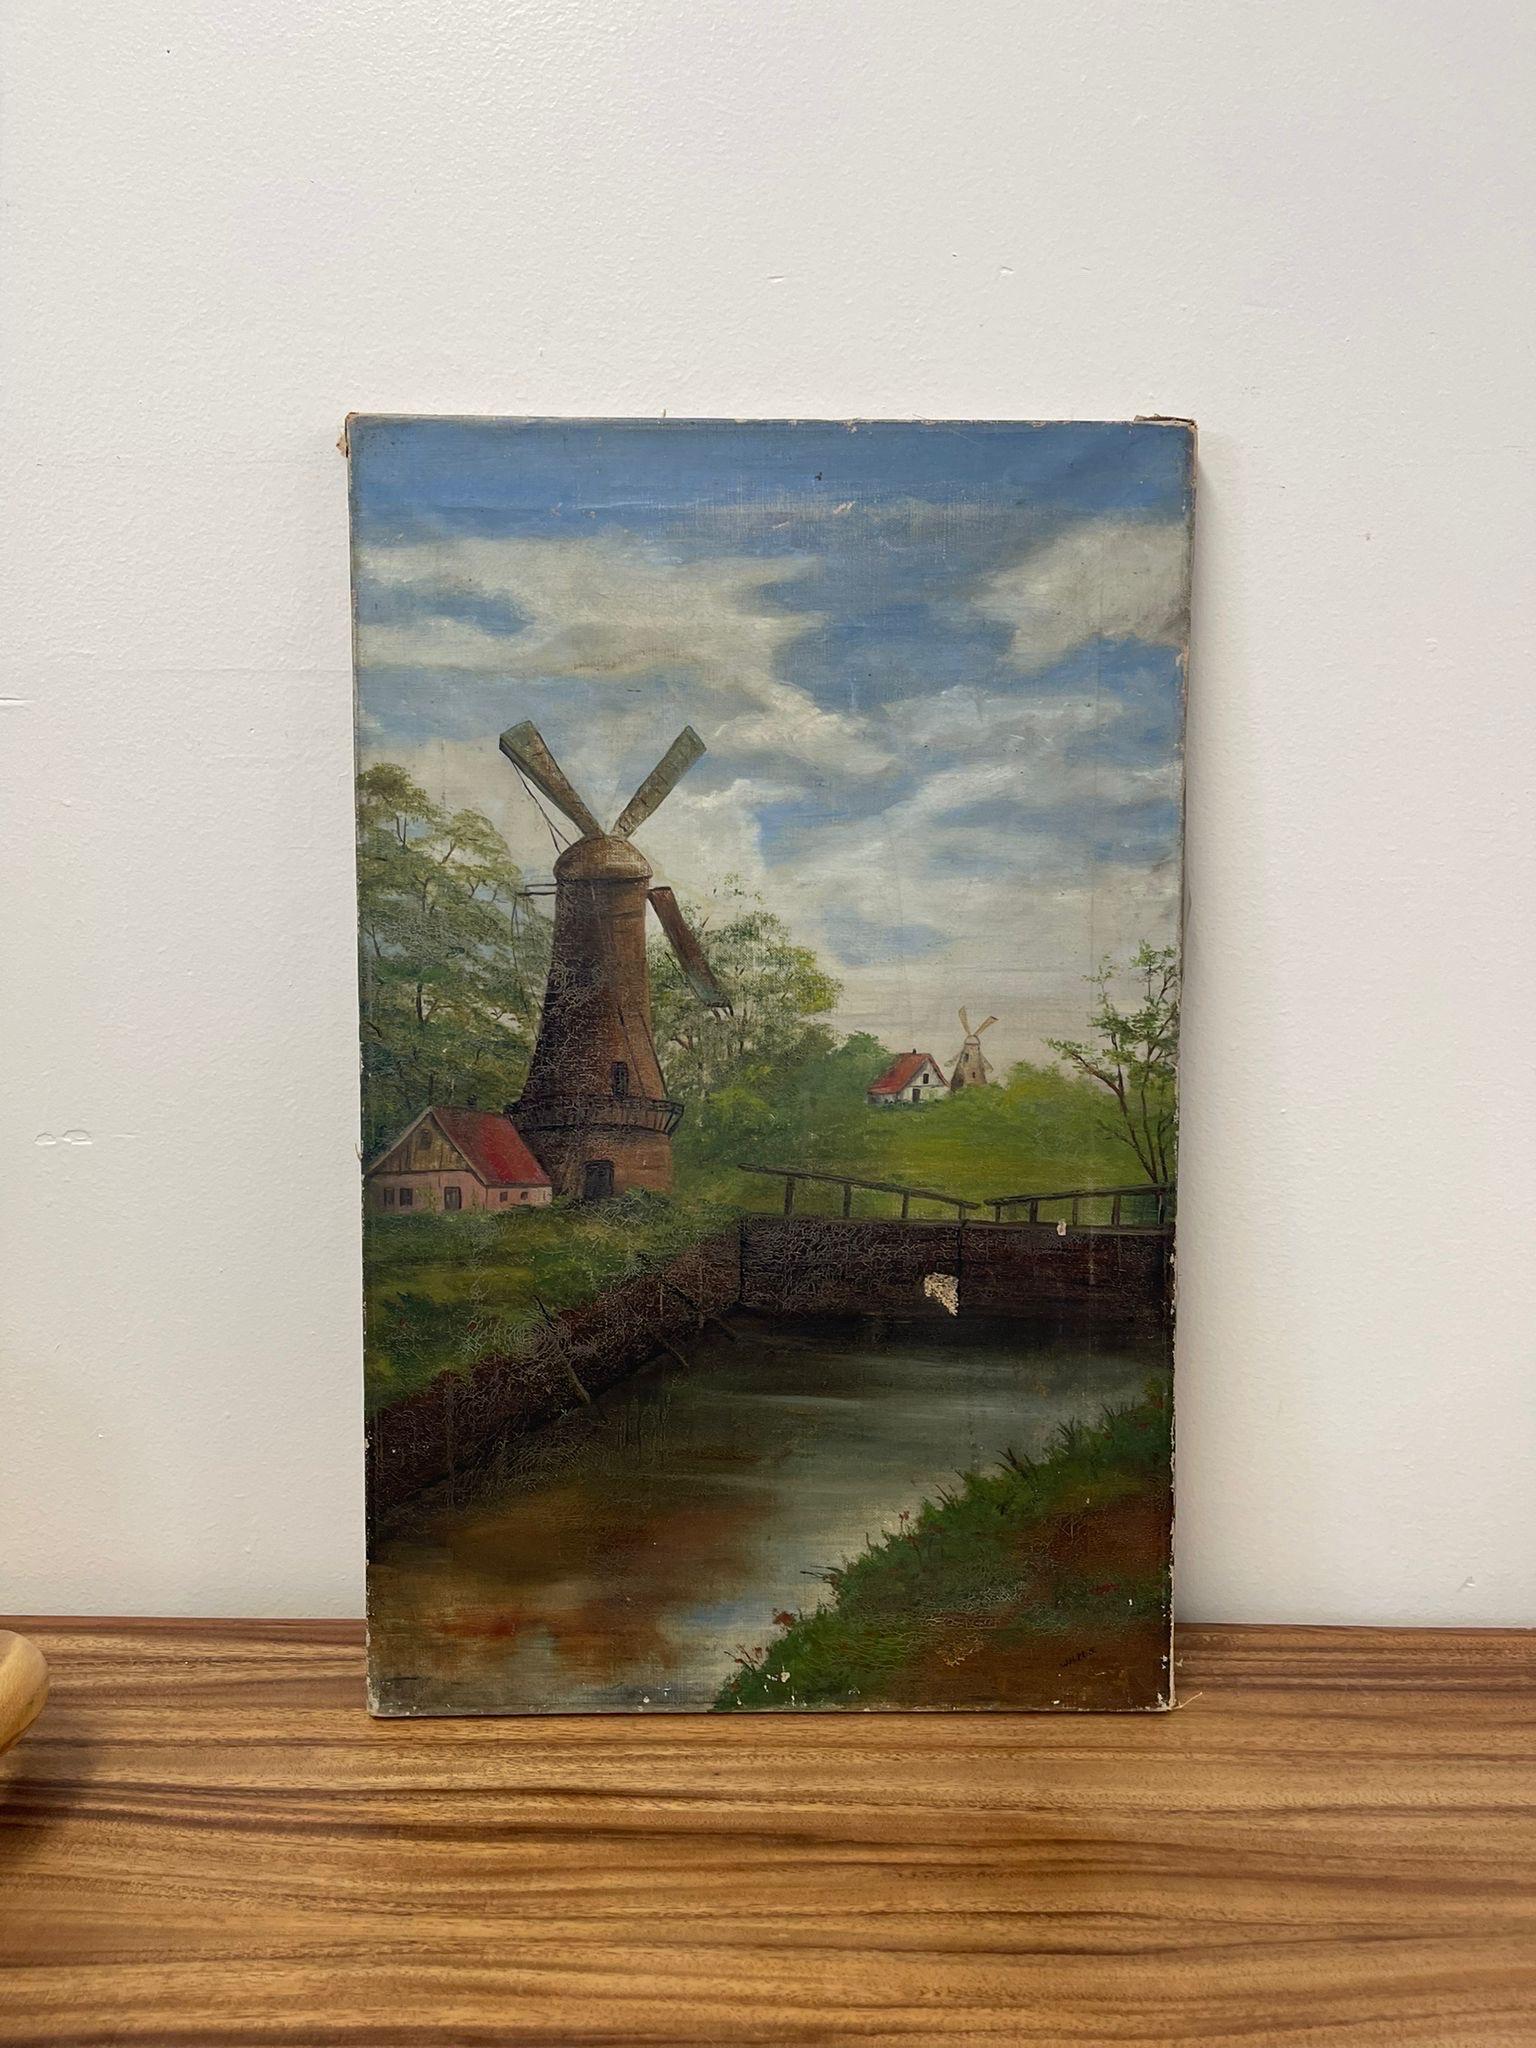 Canvas has been Nailed on to the Frame as Pictured. Cracking Paint Consistent with Age.Slight Petina in the Paint.Signed by Artist in the Lower Corner. Vintage Condition Consistent with Age as Pictured.

Dimensions. 16 1/2 D ; 1/4 D ; 26 H